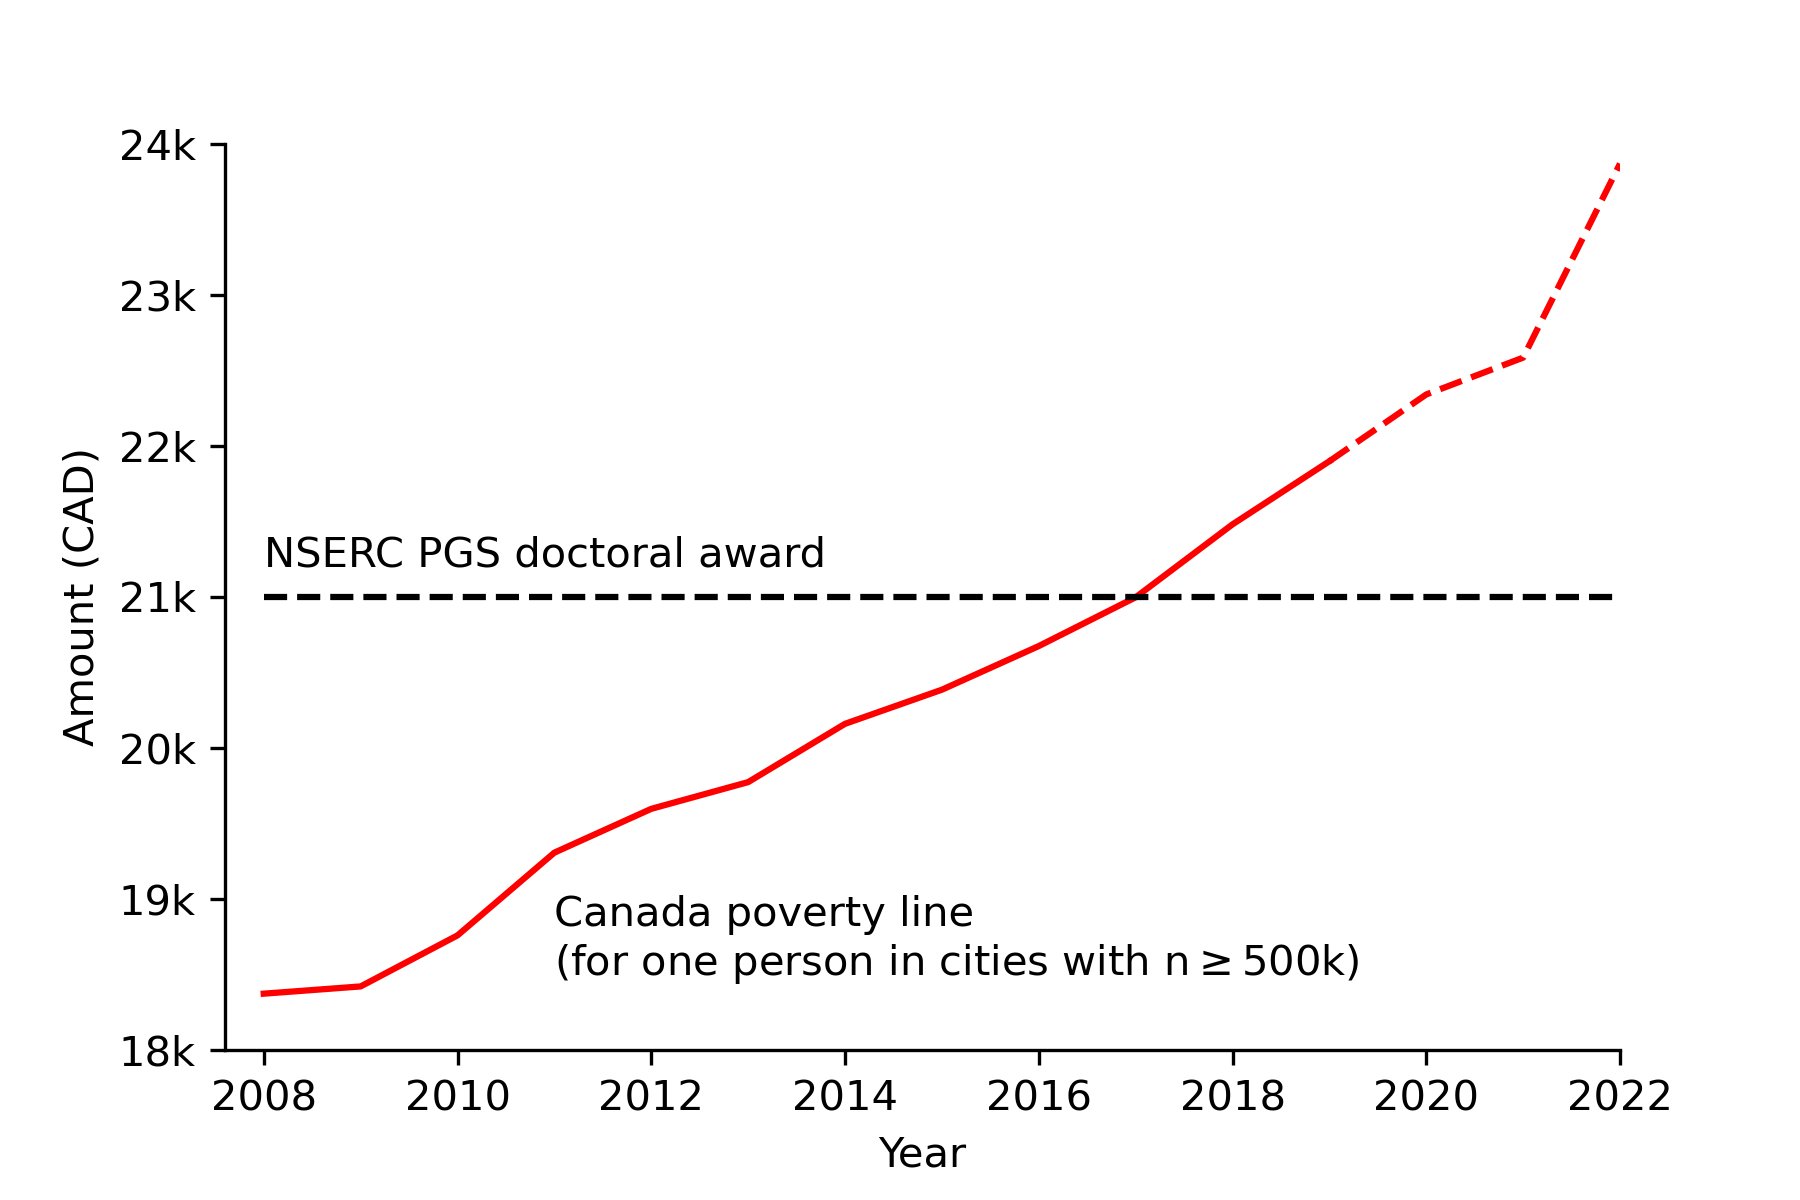 A plot with amount in Canadian dollars on the y-axis and years (since 2008) on the x-axis. One line shows the value of the NSERC PGS doctoral award since 2008 (it is flat). Another line shows the Canadian poverty line for a single individual living in cities with more than five hundred thousand people in Canada.